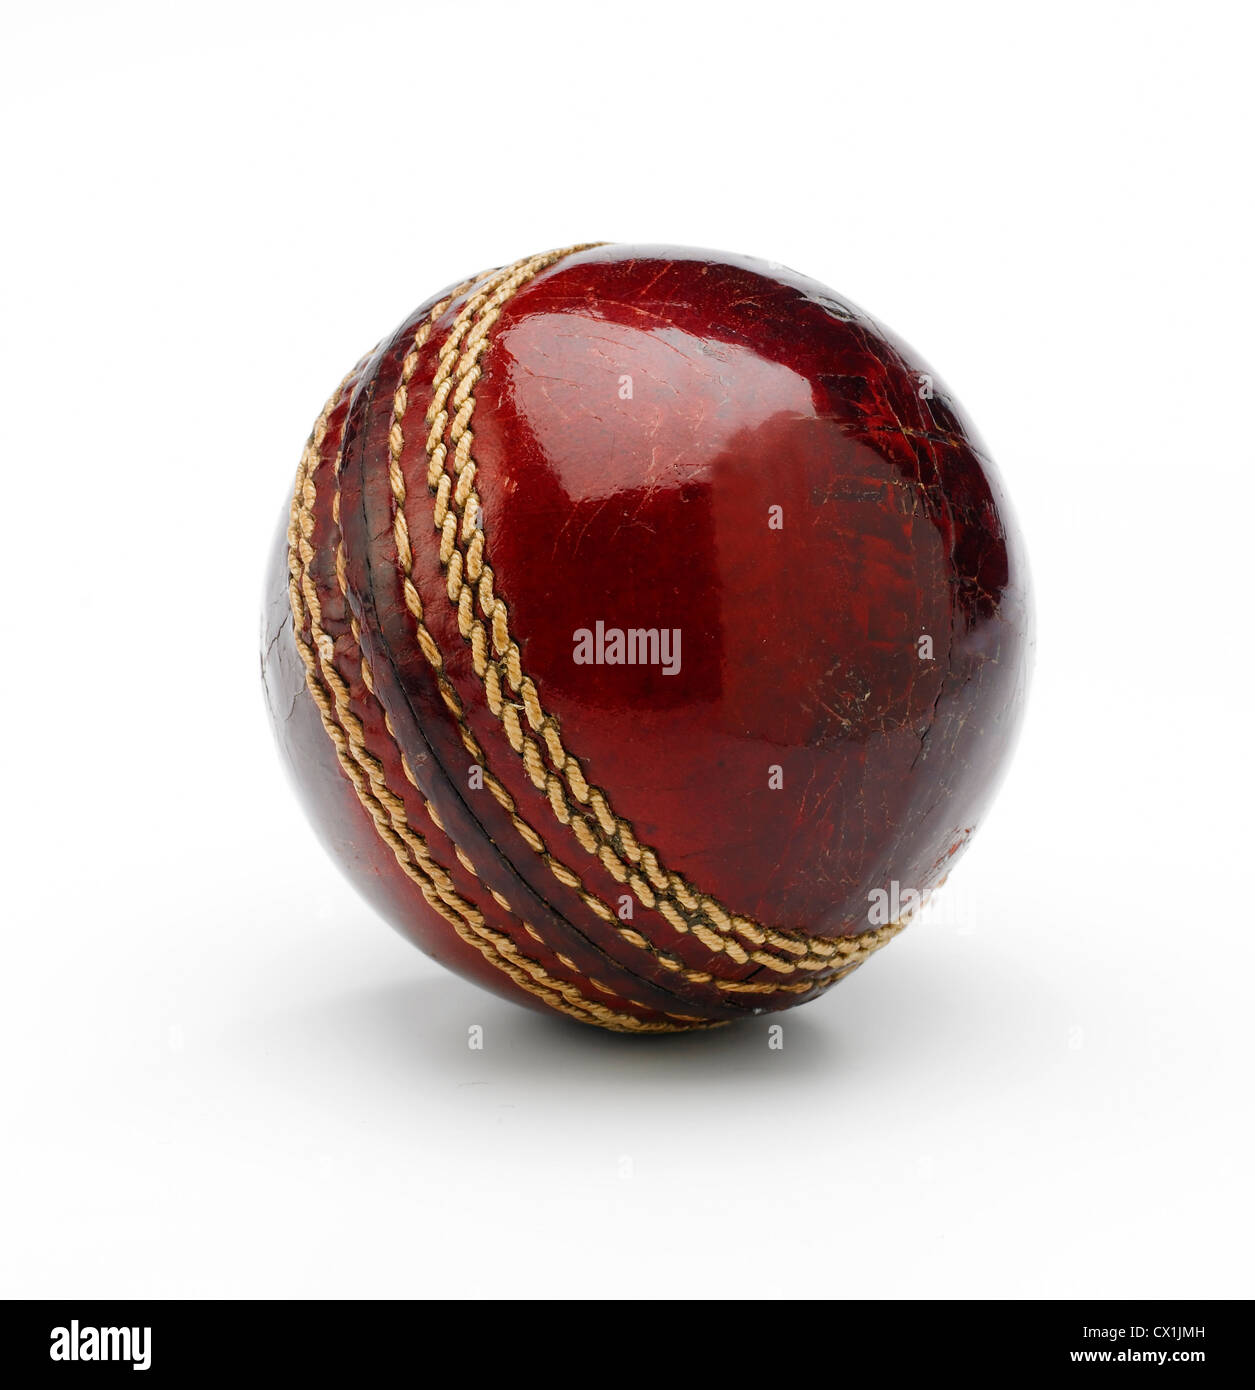 A new cricket ball on a white background showing stiching. Stock Photo